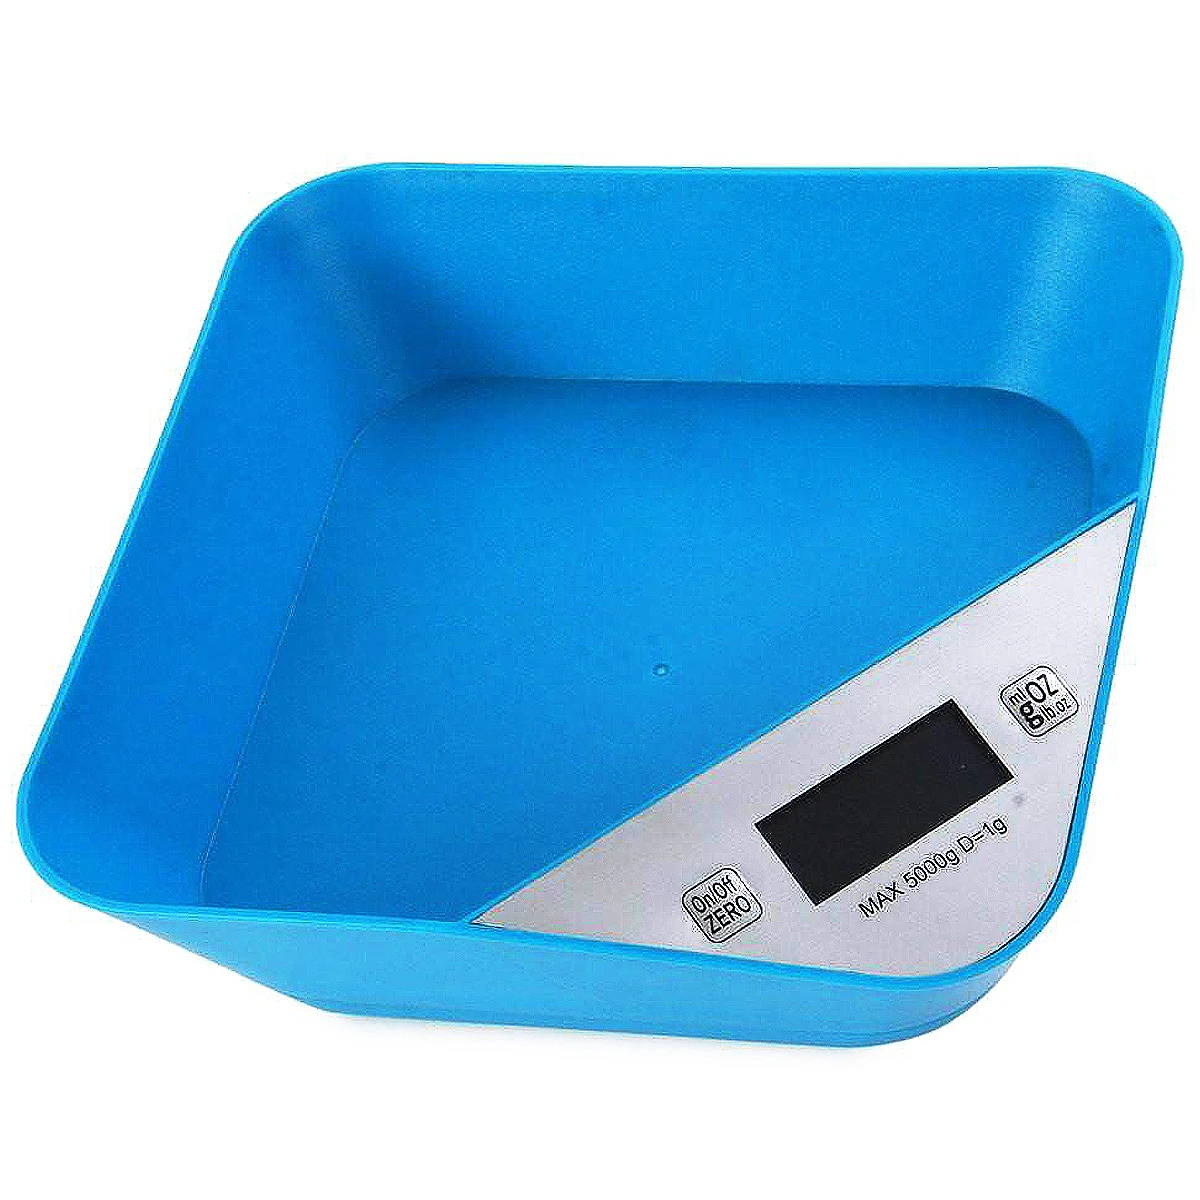 Digital Scale LCD balance Kitchen Scale Electronic Weighing Scales Parcel  Food Weights Balance for Kitchen with Bowl(5000gx1g)